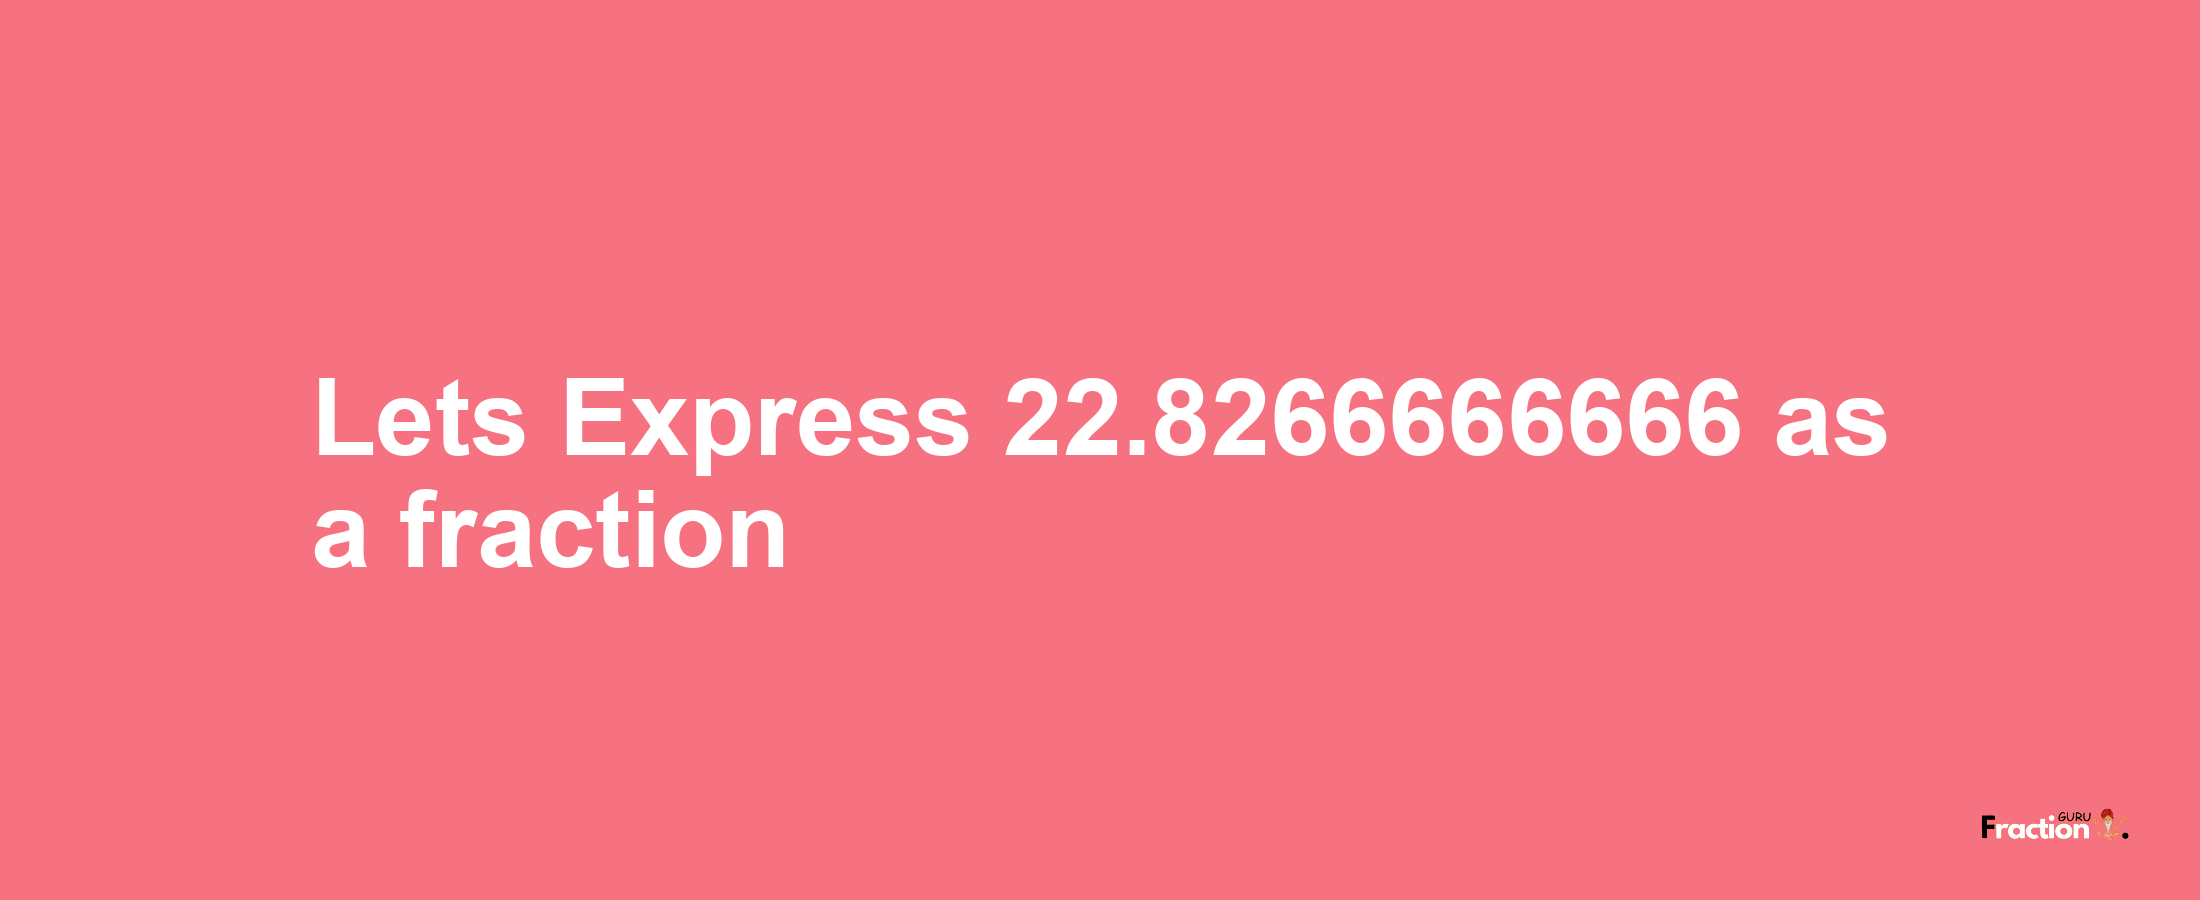 Lets Express 22.8266666666 as afraction